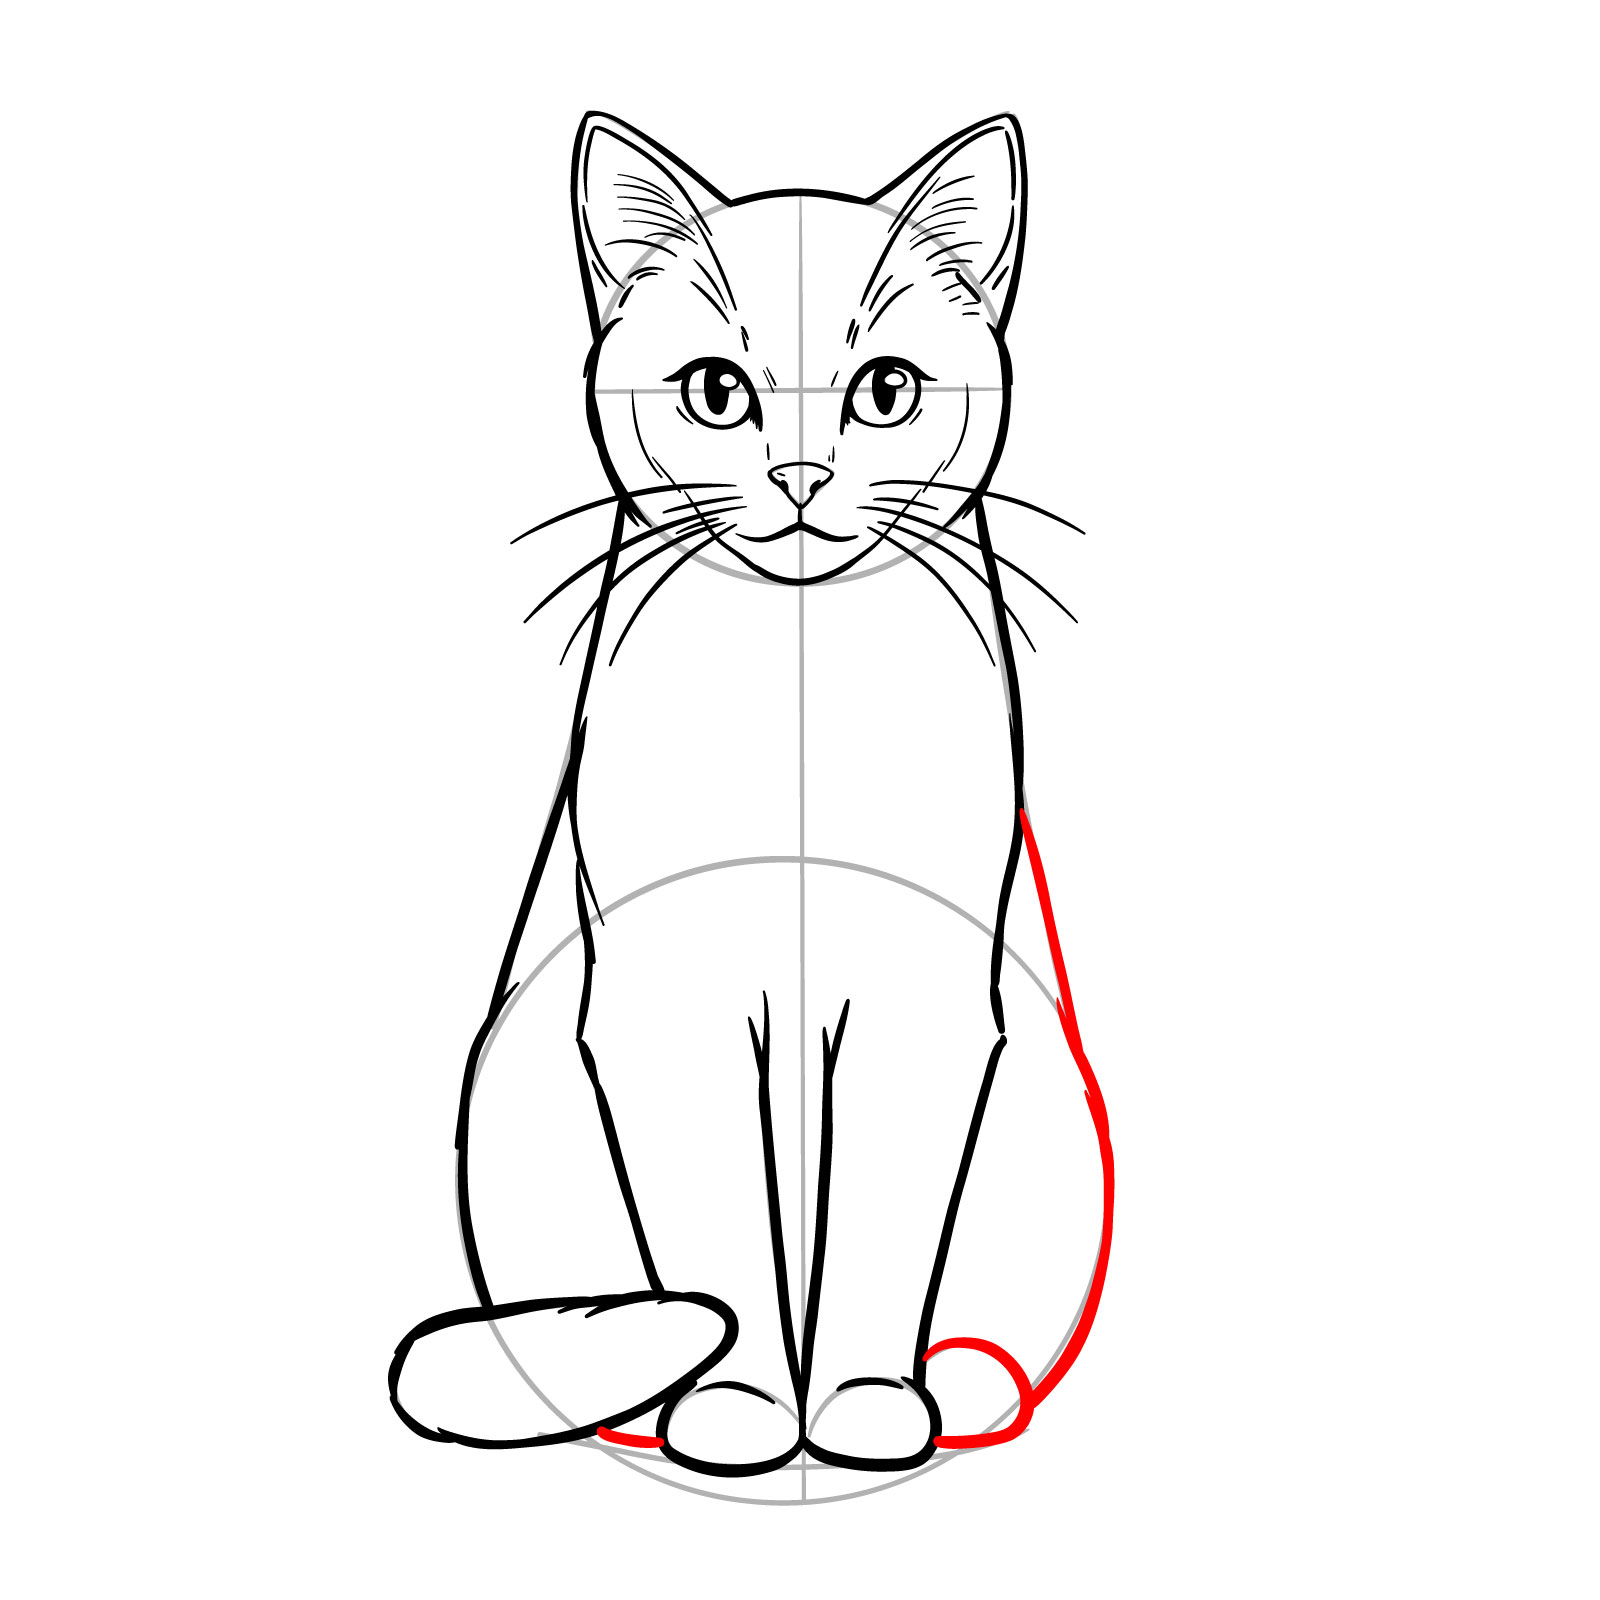 Outlining the second side and back legs of the sitting cat sketch - step 14